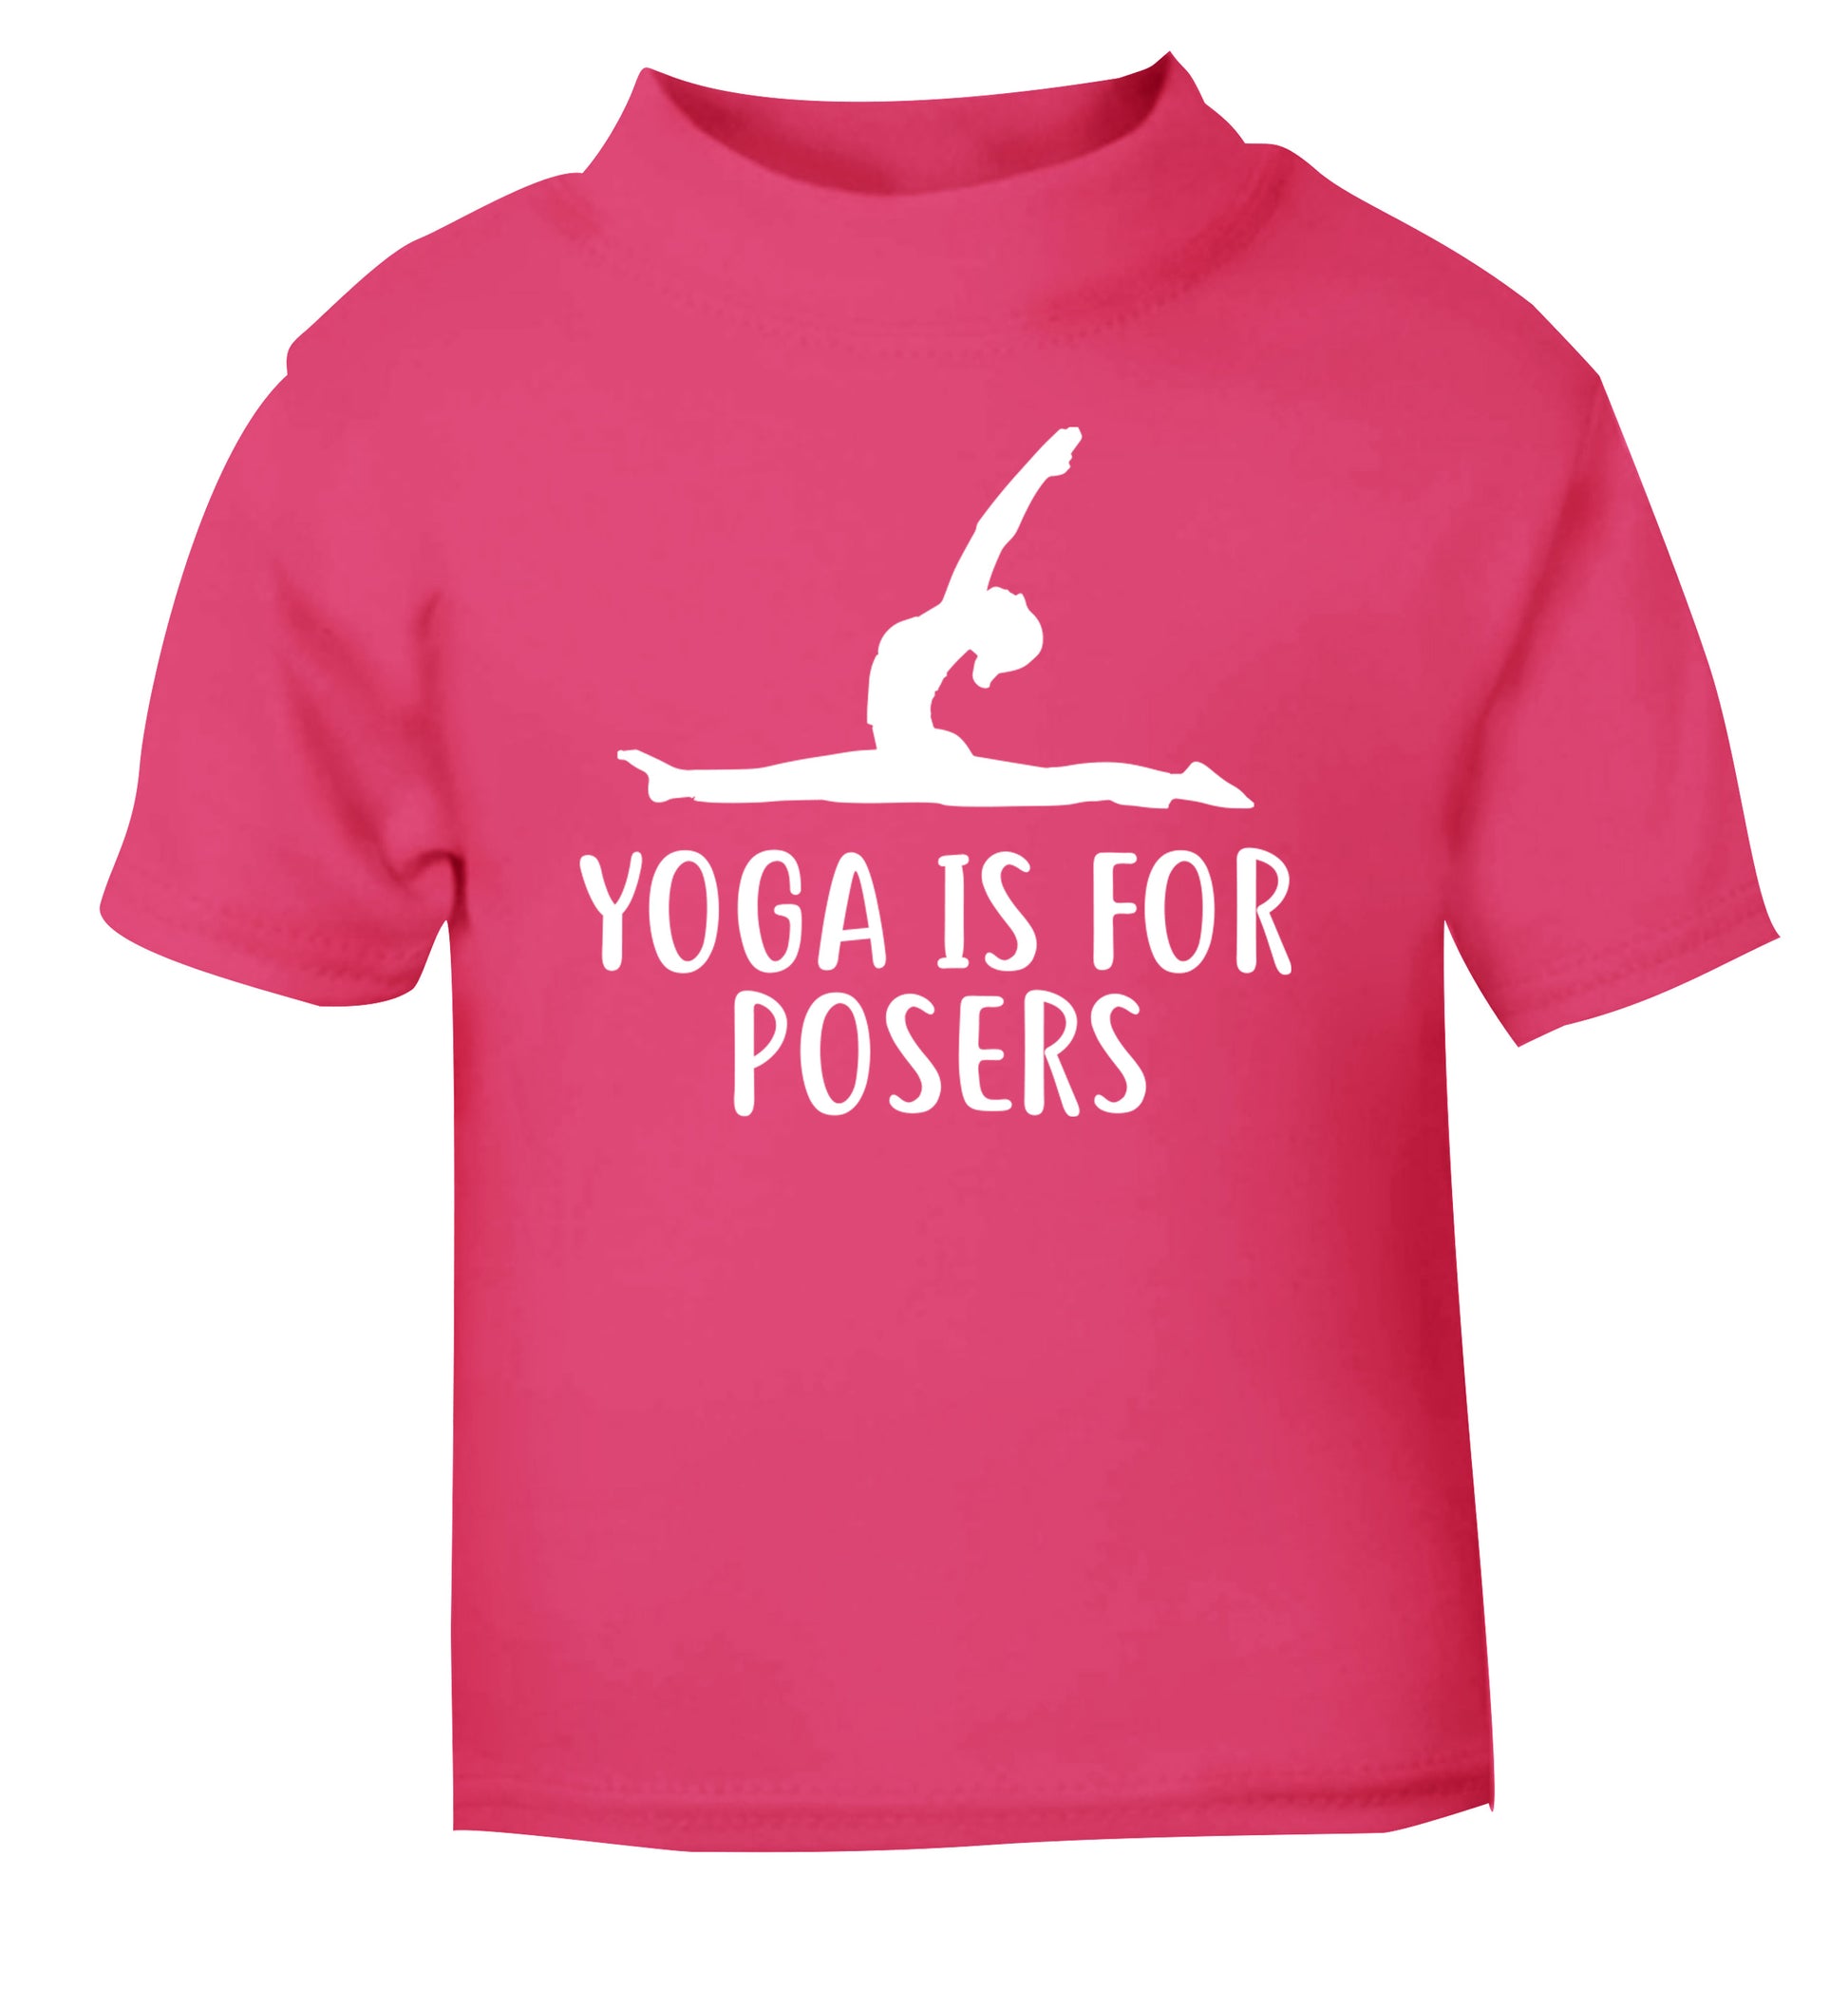 Yoga is for posers pink Baby Toddler Tshirt 2 Years